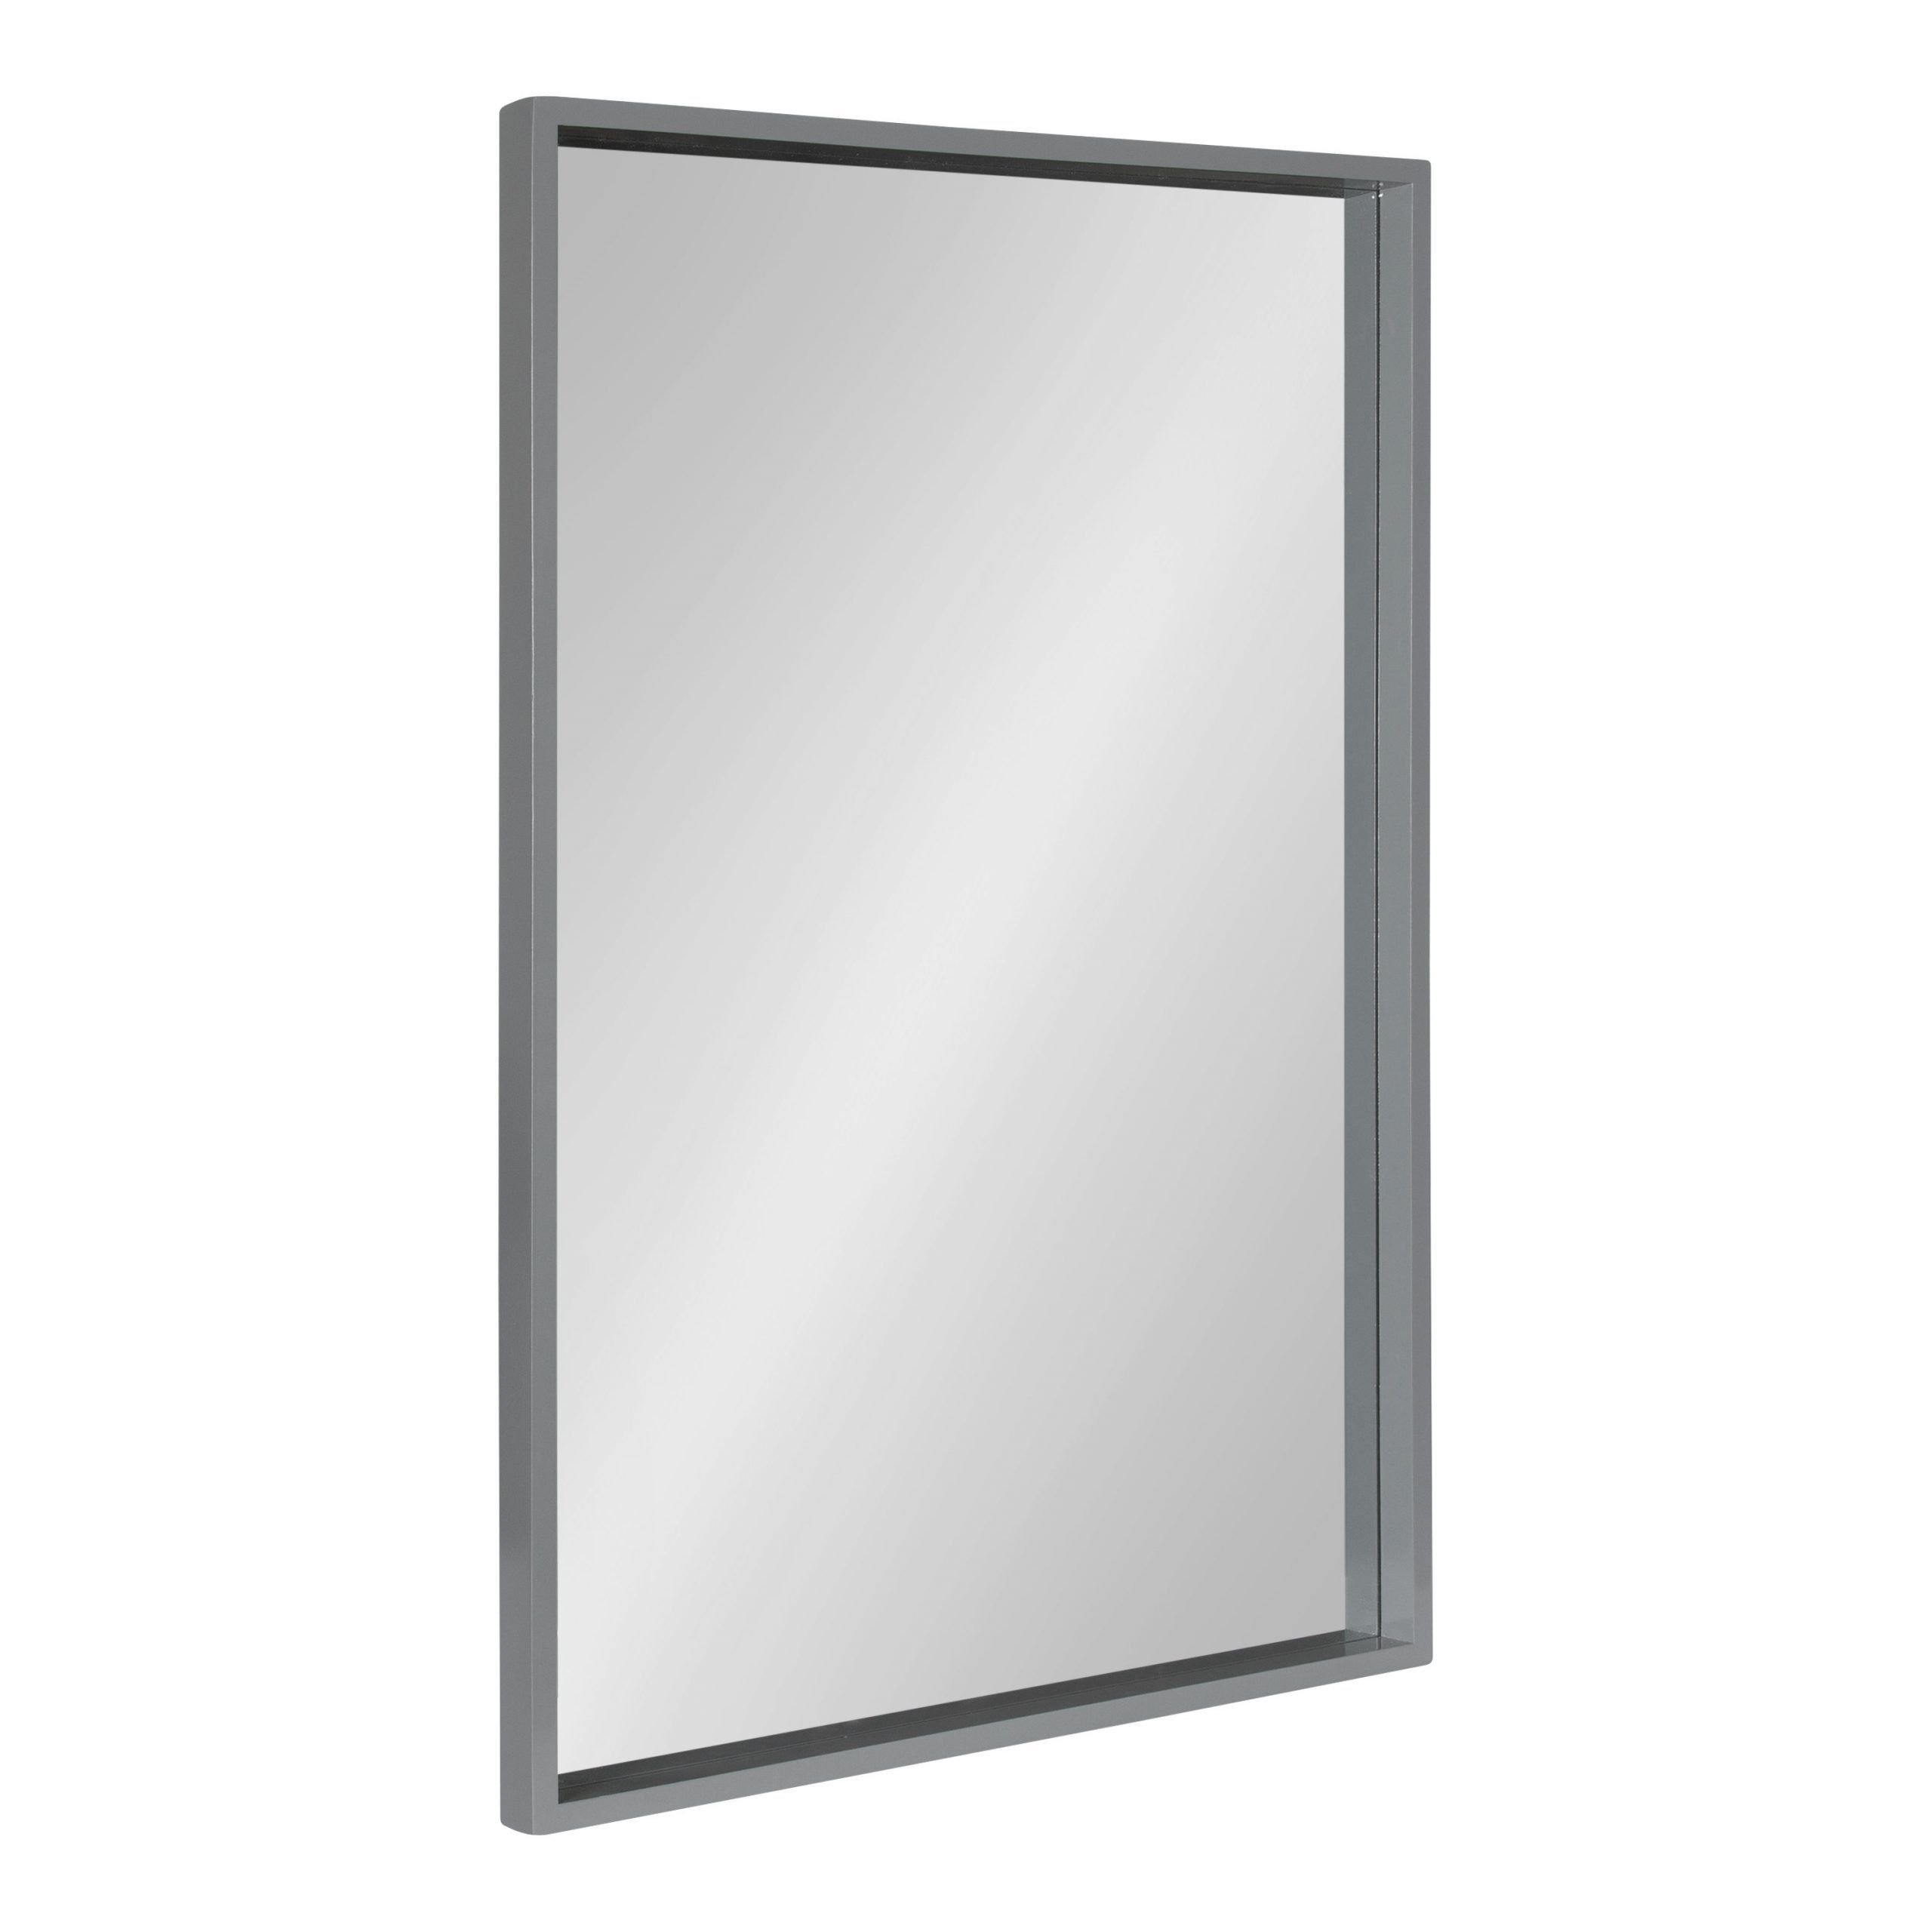 Kate And Laurel Travis Modern Wood Framed Wall Mirror, 24 X 36, Gray With Regard To Modern Rectangle Wall Mirrors (View 5 of 15)